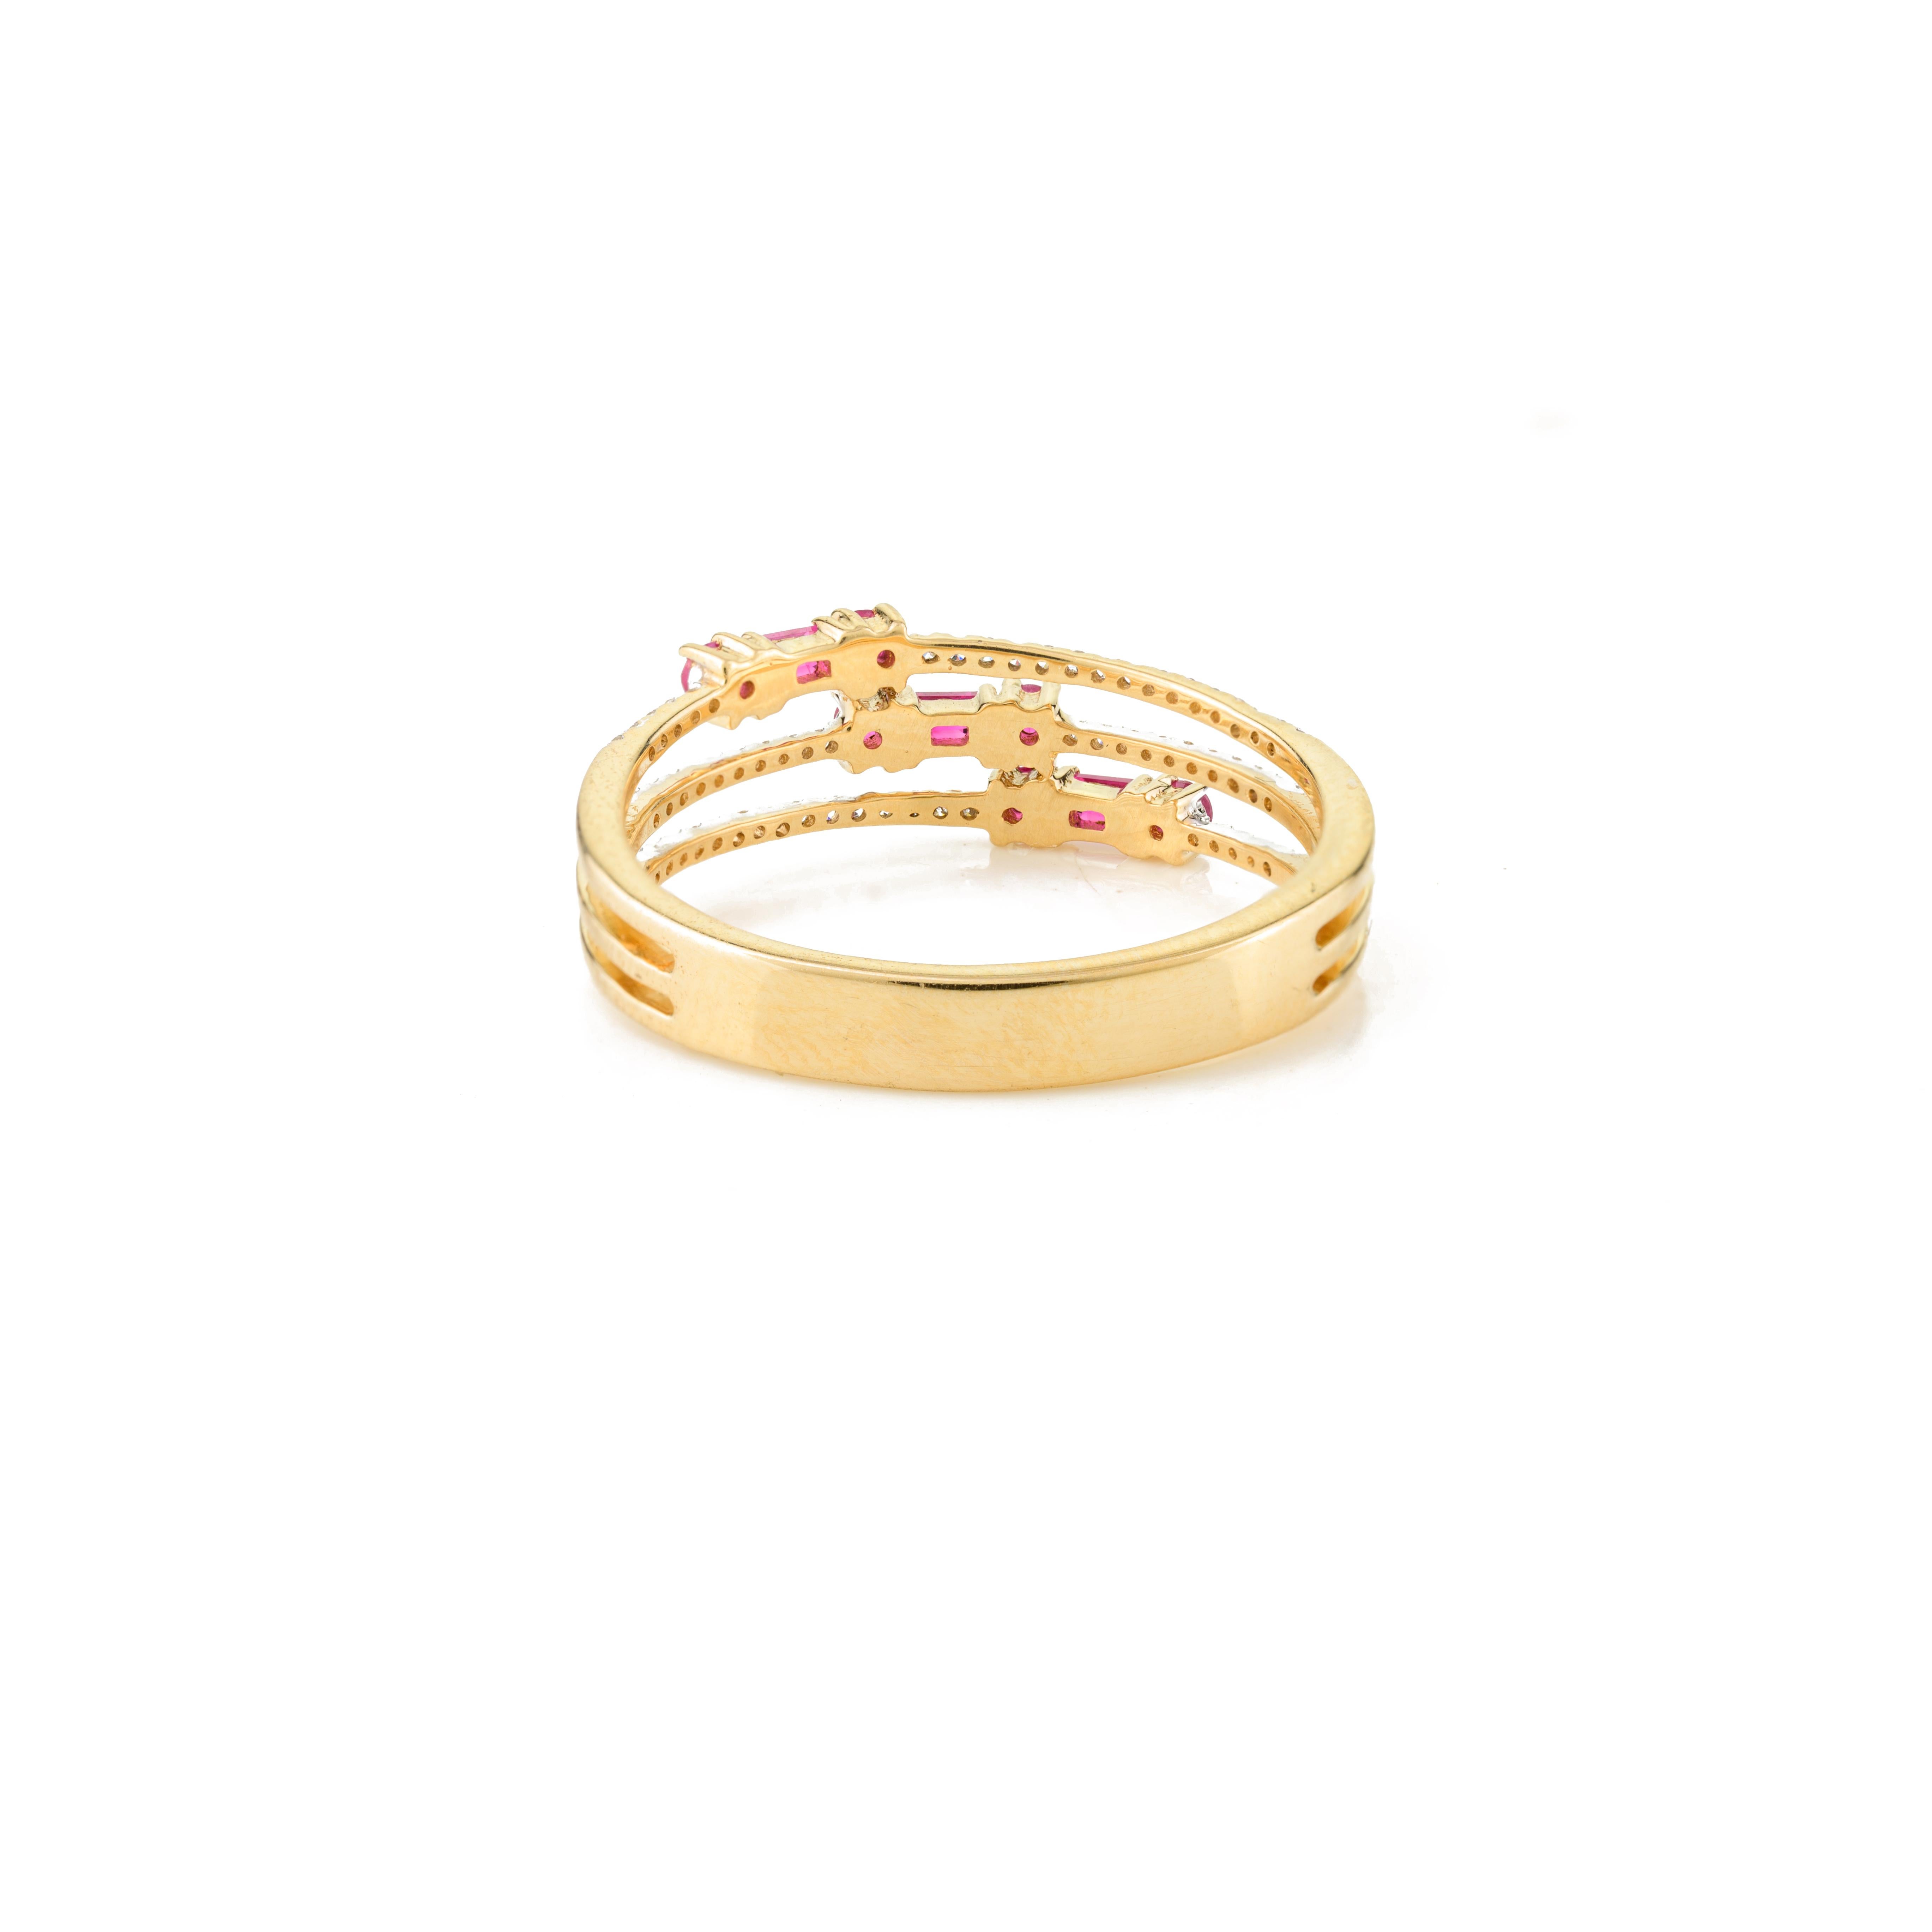 For Sale:  Designer Ruby Diamond Wedding Band Ring Gift for Mom in 18k Yellow Gold 5